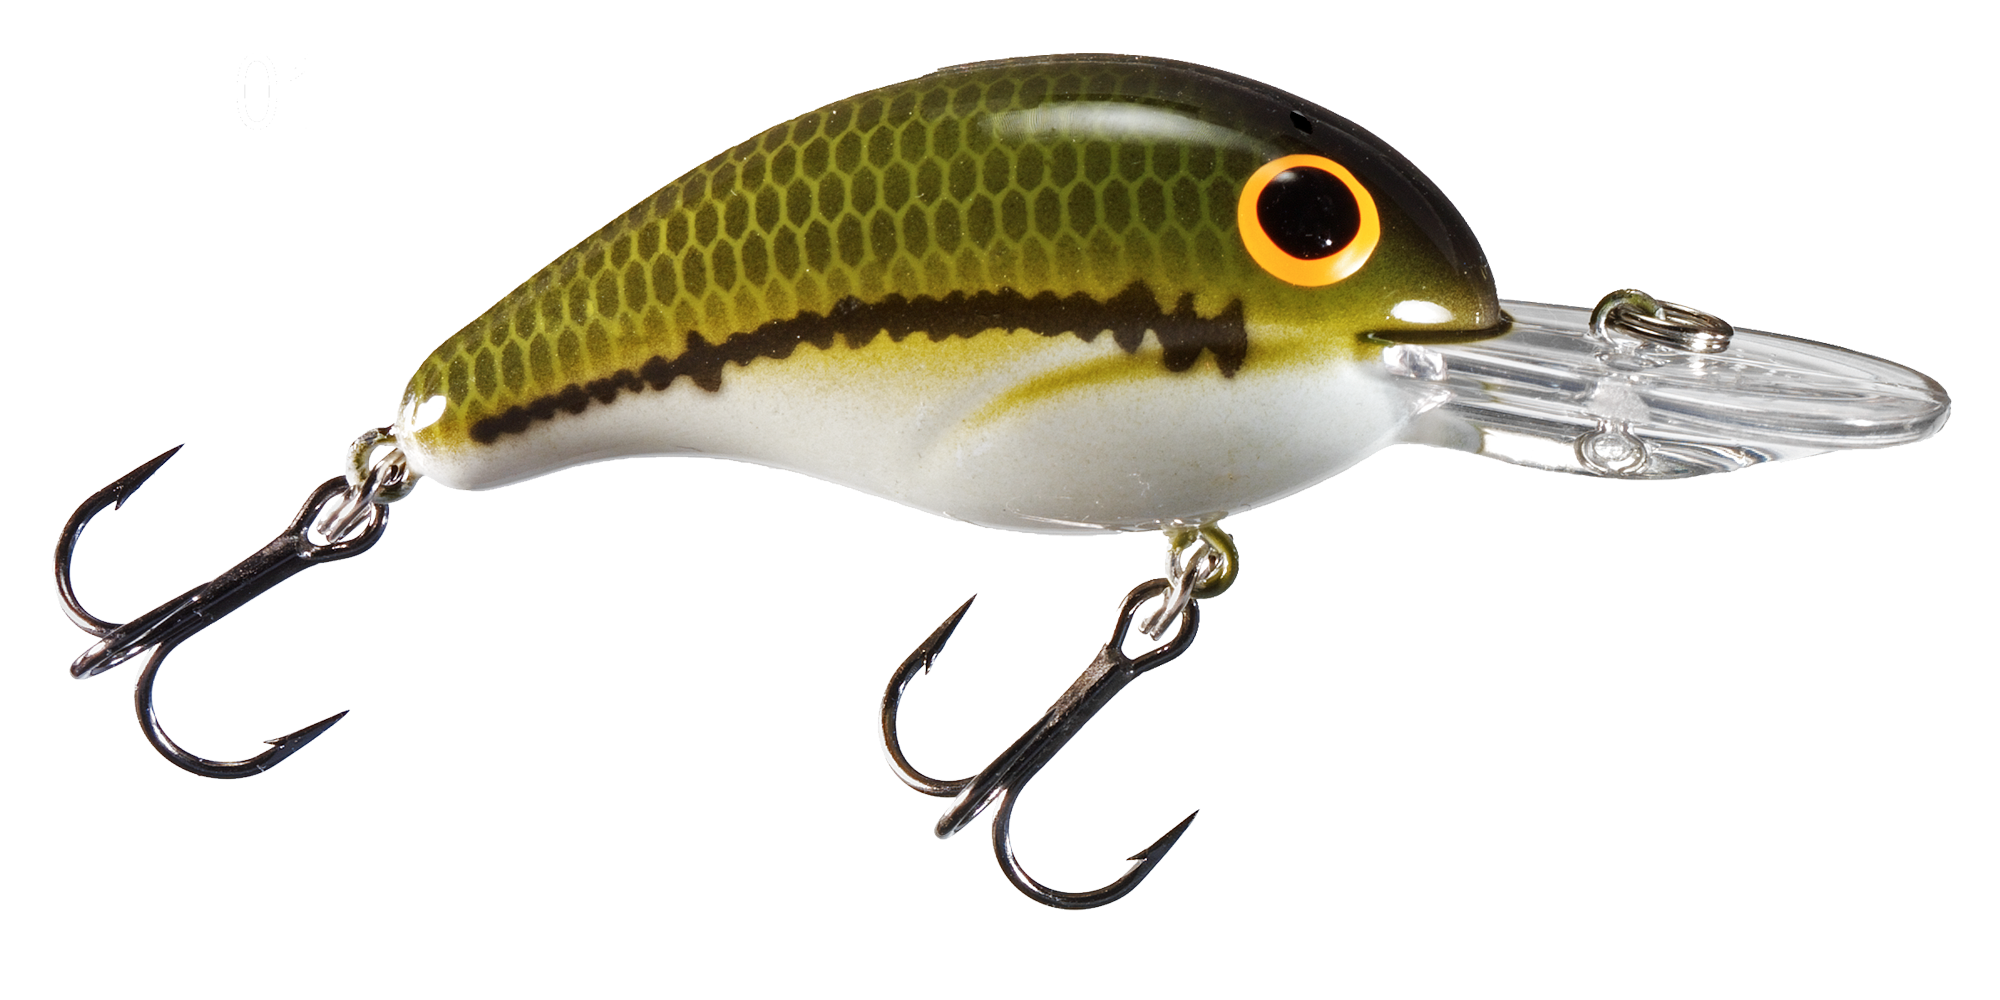 BANDIT LURES Crankbait Series 100 200 & 300 Bass Fishing Lures, Bluegill,  Series 200 (Dives to 8')